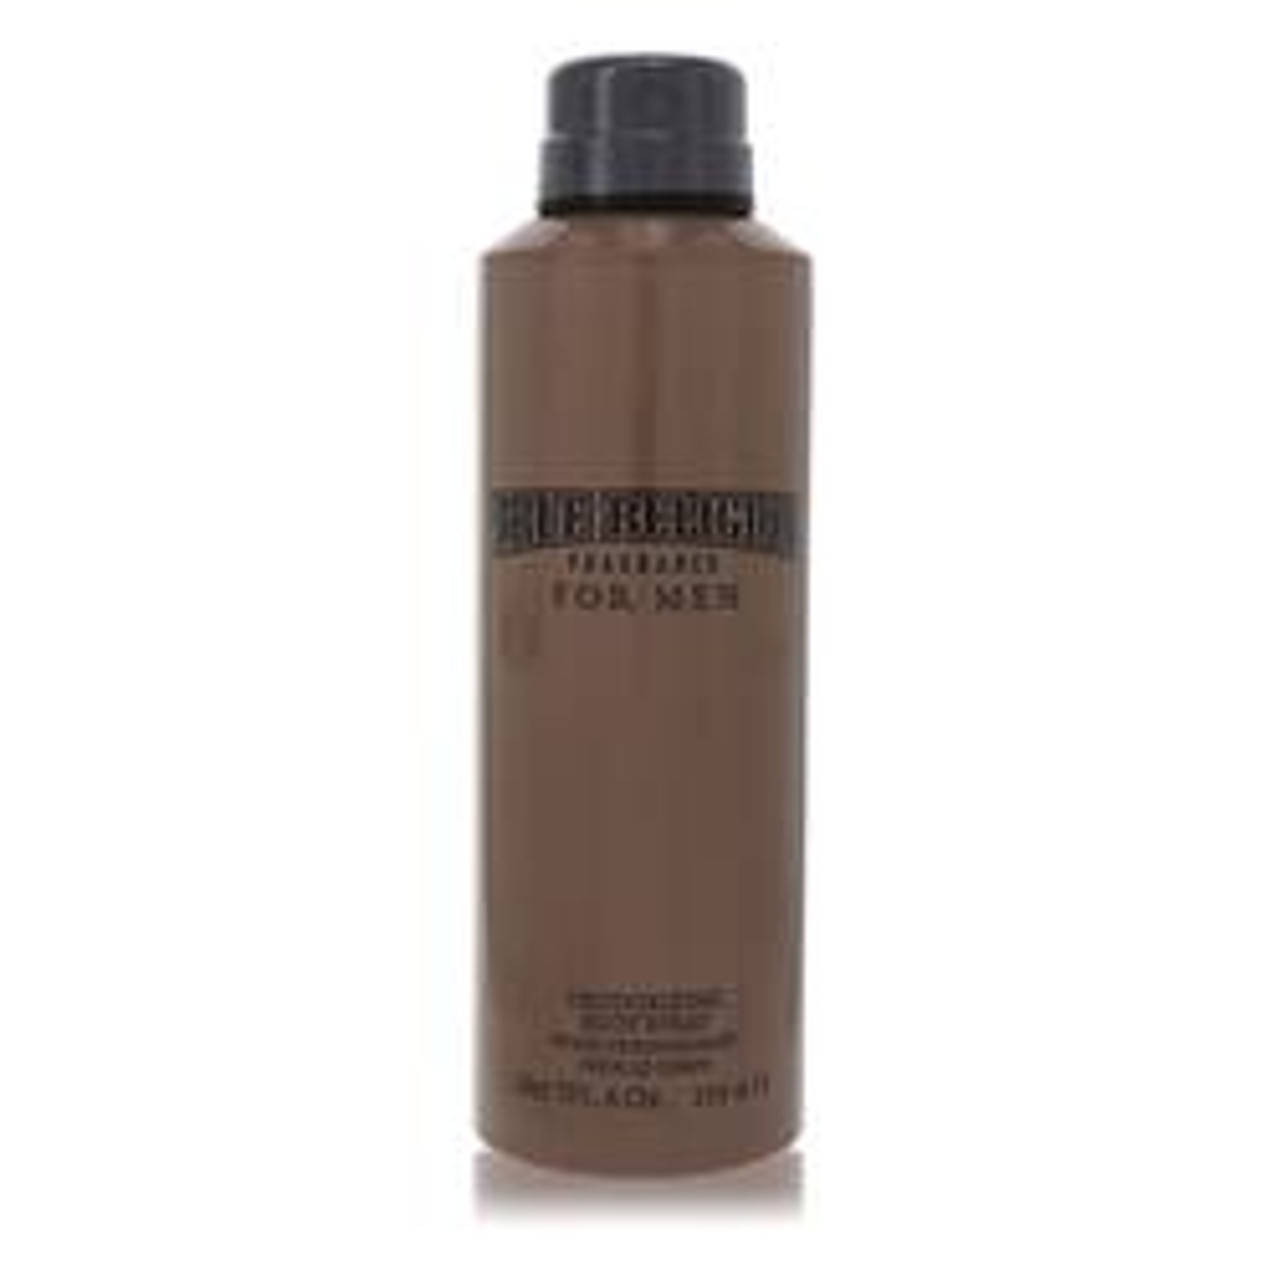 True Religion Cologne By True Religion Deodorant Spray 6 oz for Men - [From 39.00 - Choose pk Qty ] - *Ships from Miami